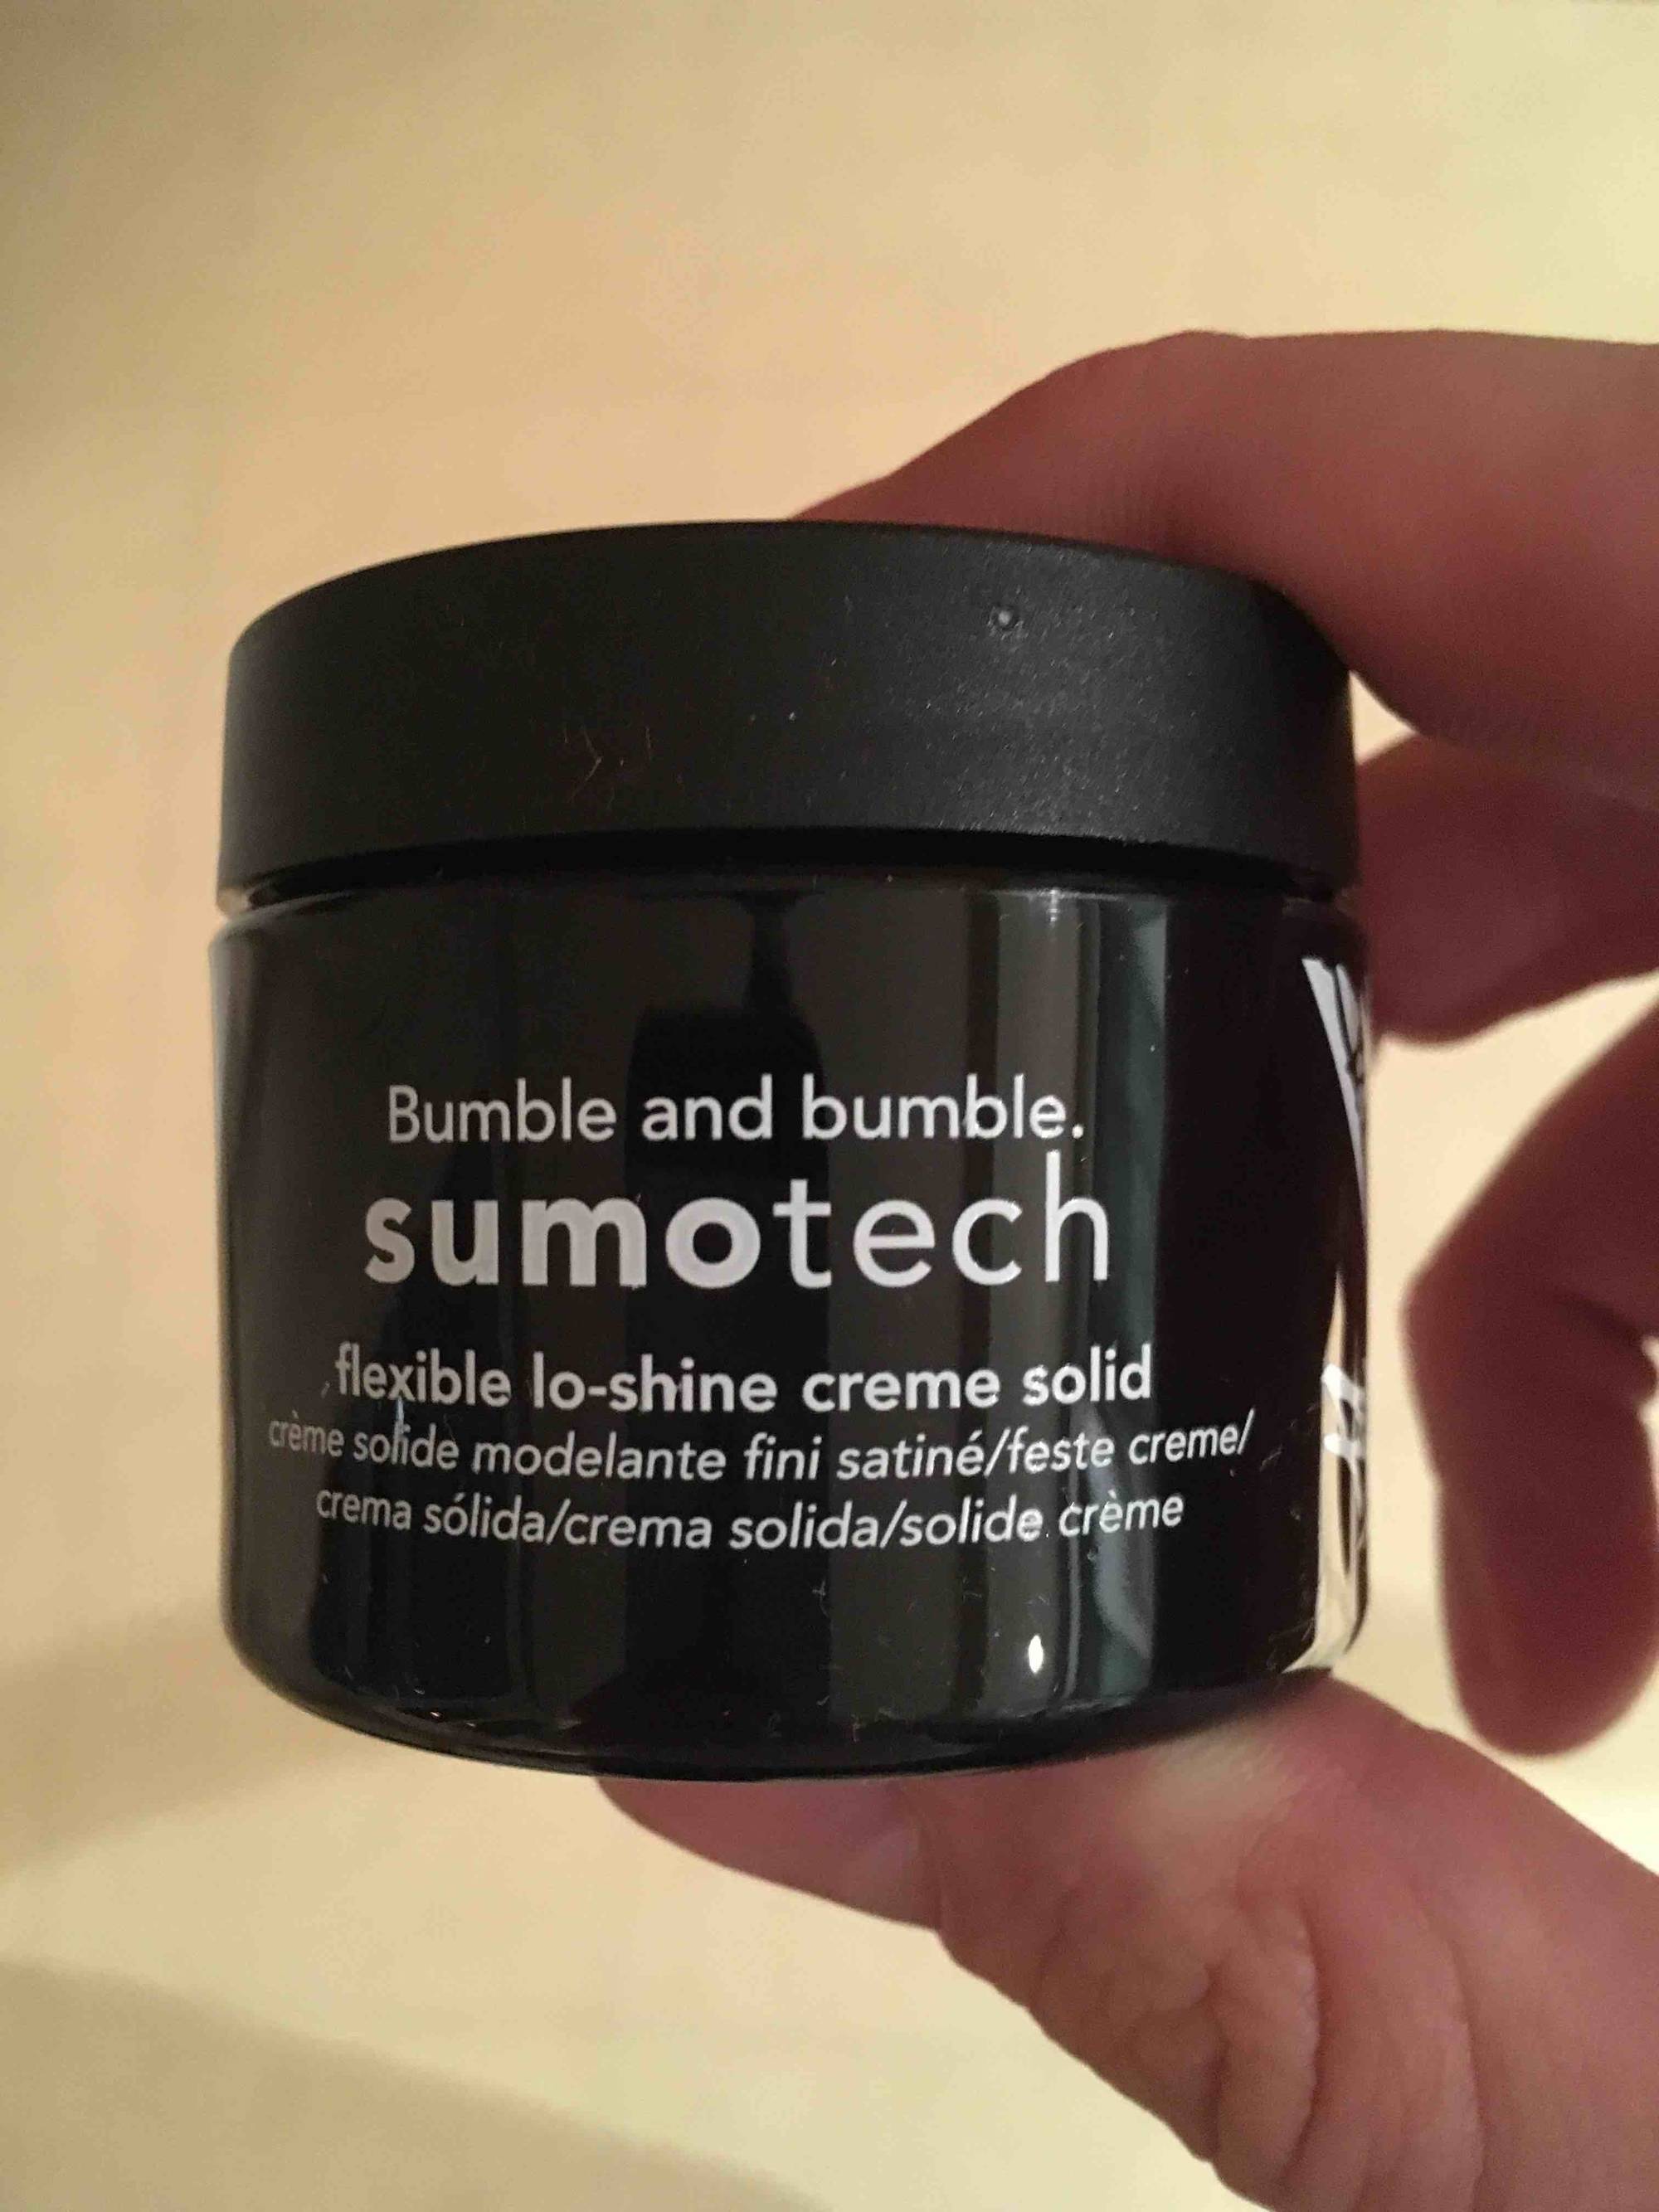 BUMBLE AND BUMBLE - Sumotech - Flexible lo-shine creme solid